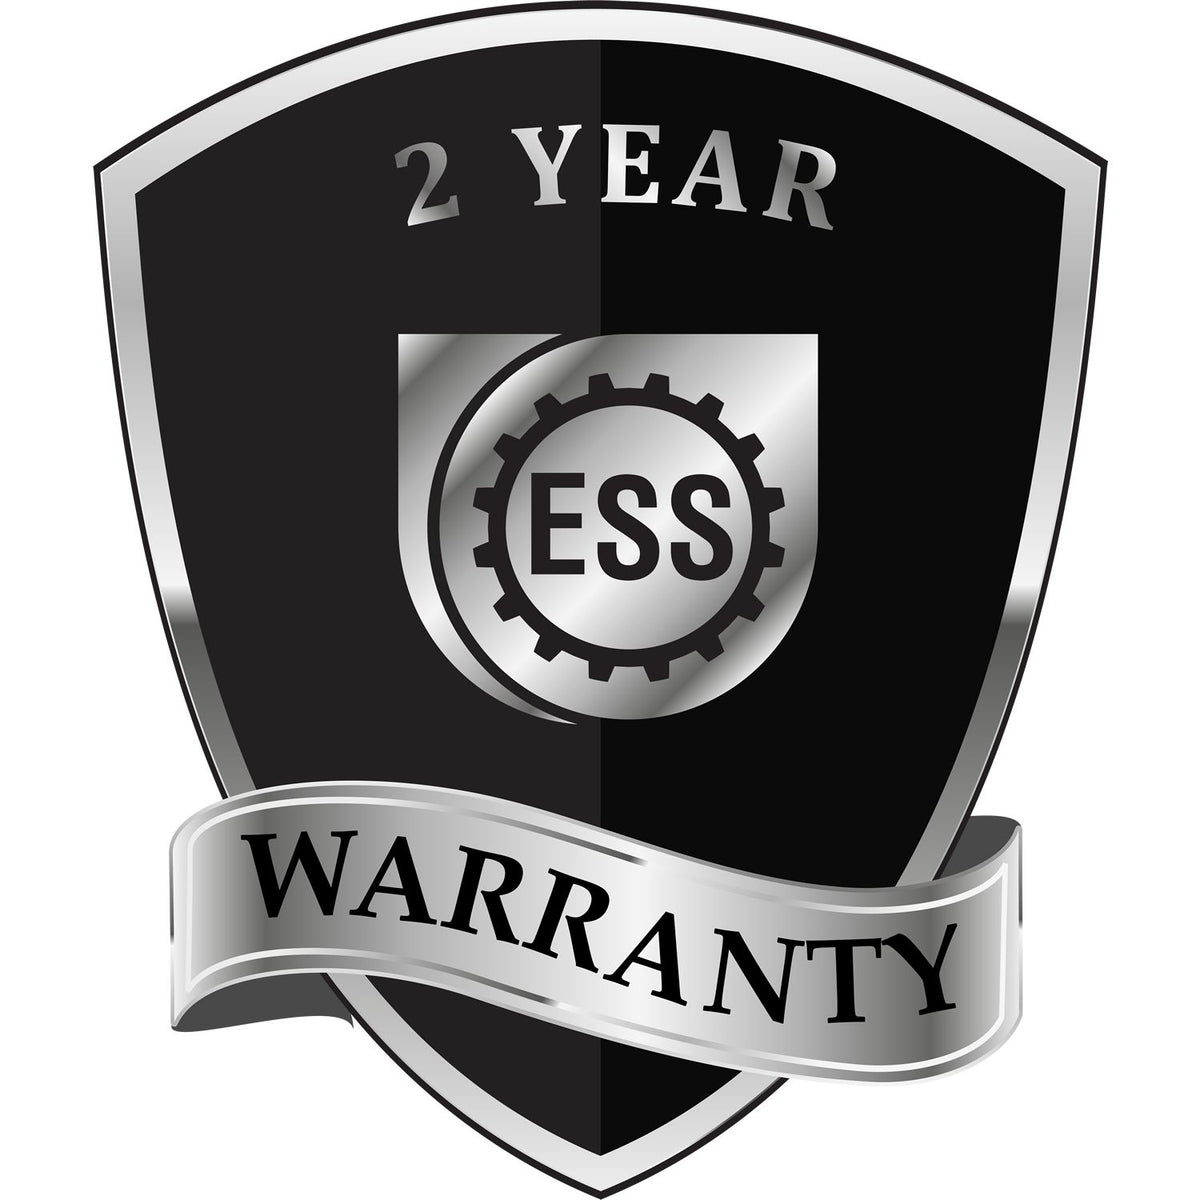 A black and silver badge or emblem showing warranty information for the Hybrid New Hampshire Architect Seal